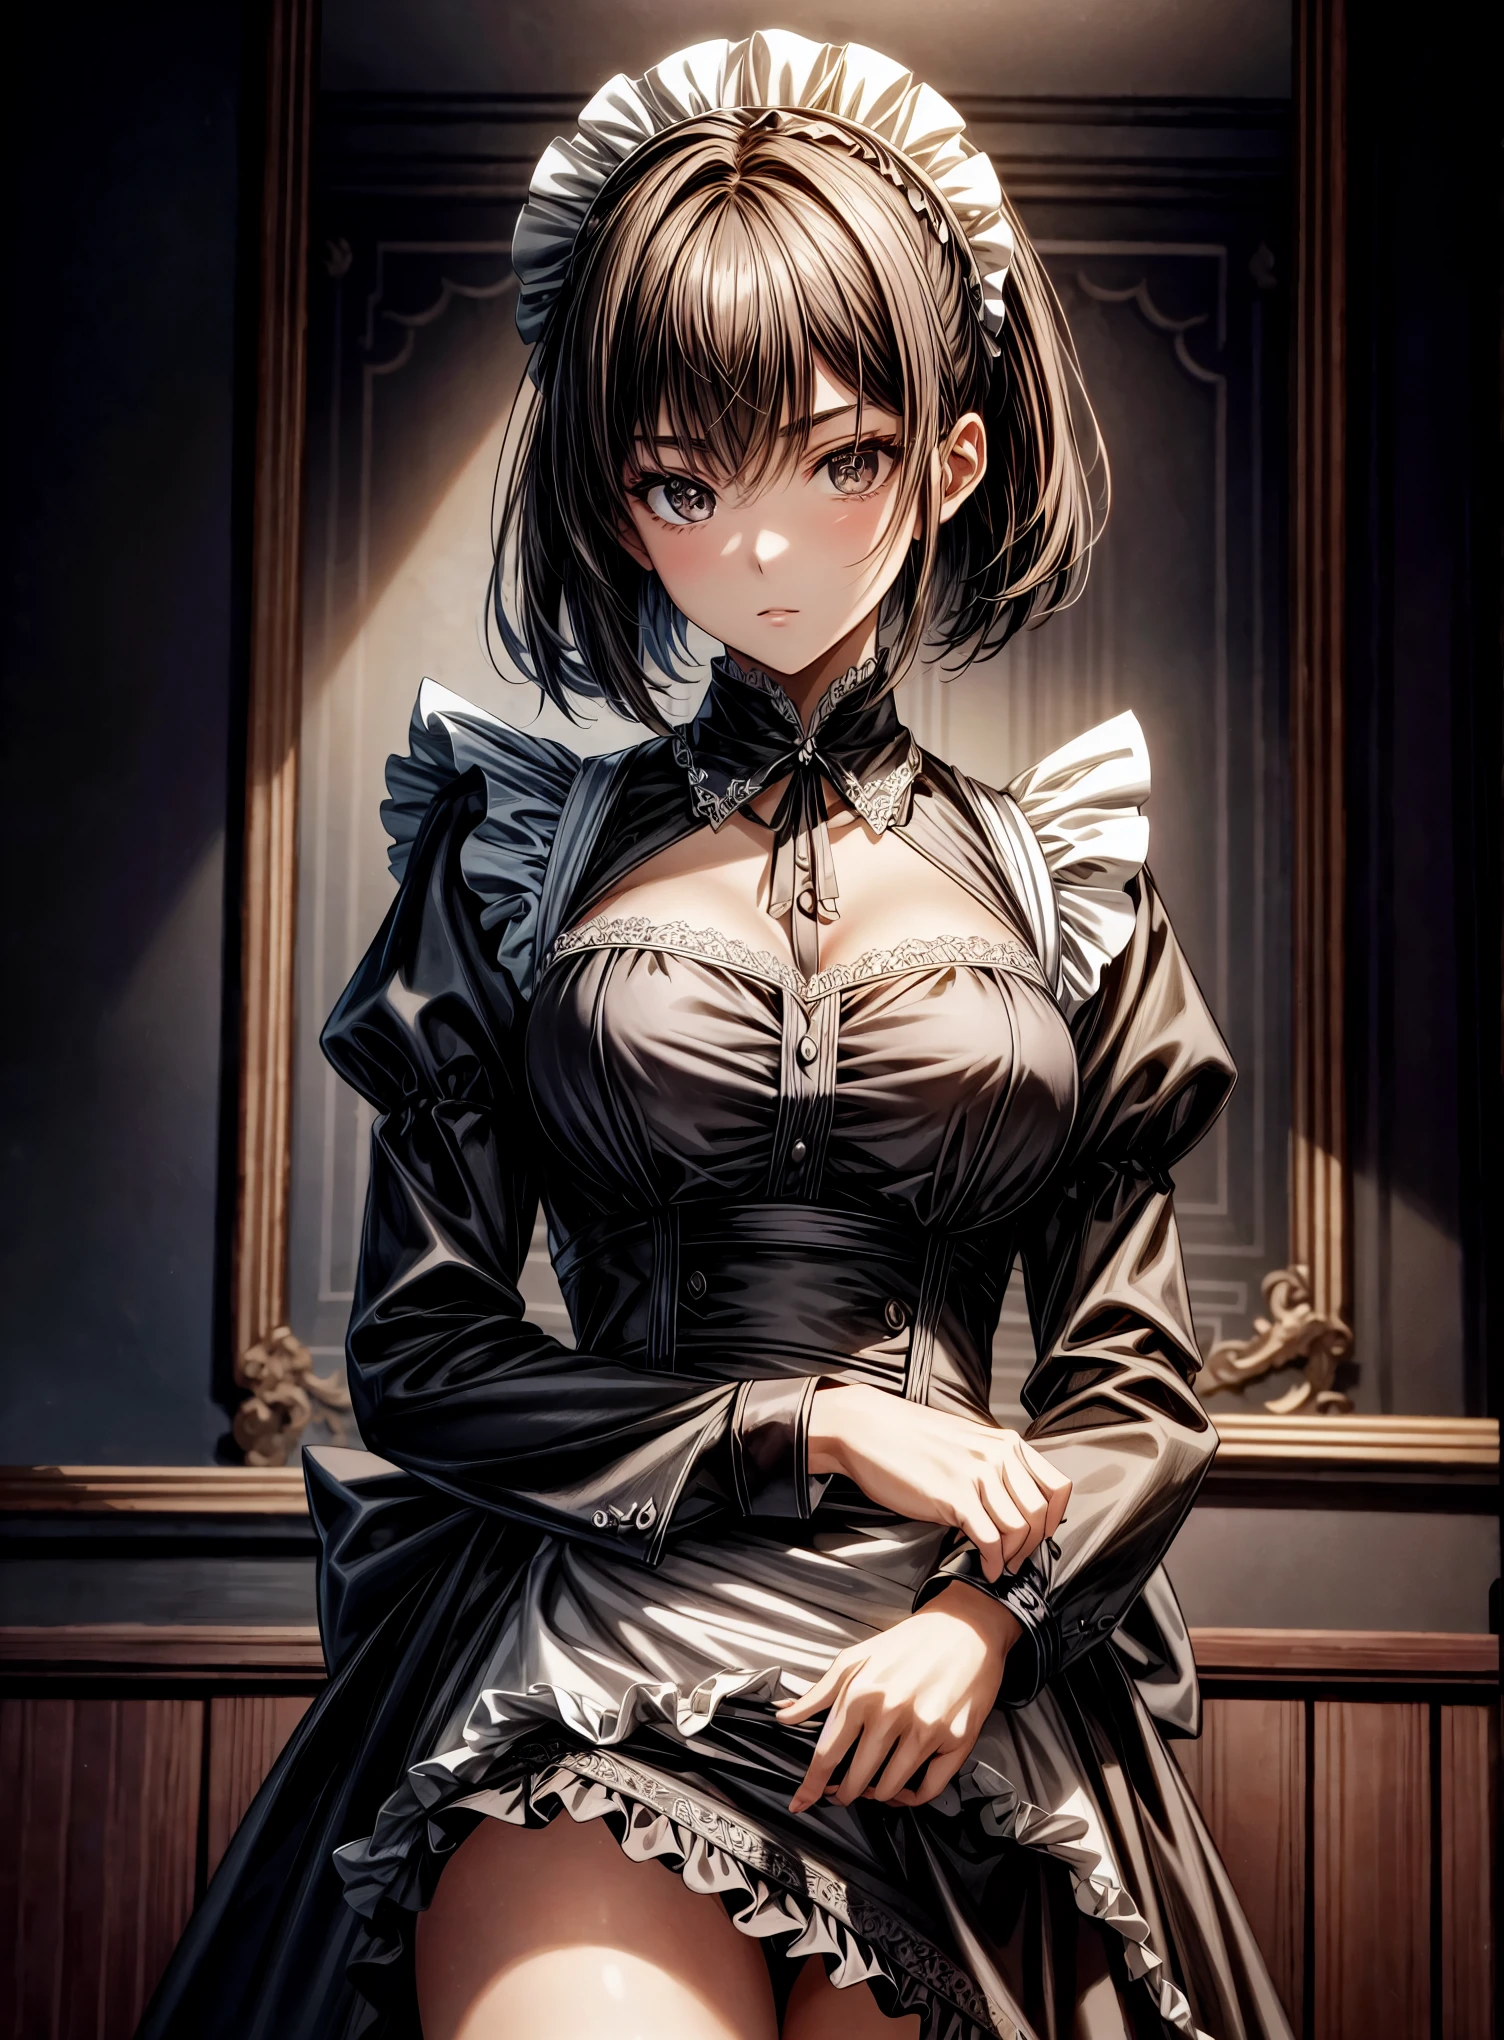 The scene unfolds with a 16-year-old girl, enveloped in a gothic aura, rising majestically before the viewer. ((Her dark hair, cut in a bob style)), frames her pale face, while her dark brown eyes shine with an enigmatic intensity. She is clad in a ((maid uniform):1.3), a choice that amplifies her slender and gloomy figure, highlighting her singular presence. Her posture is firm, conveying an unwavering determination, as if challenging fate itself. ((Full_body):1.5)

The soft light highlights the details of her appearance, revealing every shadow and contour. Every line of her uniform is sharp, every fold captured in ultra-realistic detail. She is positioned in full body, in an anime style that adds a layer of artistic expression to her image. Every feature of her face is precisely delineated, conveying subtle and complex emotions that invite the viewer to delve deeper into her story.

The advanced technology of Unreal Engine 5 brings the scene to life, providing an unparalleled sense of immersion. Every texture is rich in detail, every shadow and reflection contributing to the immersive atmosphere. The visual quality is unmatched, with a 16K resolution that elevates the experience to new levels of realism. Every pixel is loaded with intensity, capturing the essence of the young gothic girl in all her dark glory.

Her dynamic and confident pose conveys a sense of power and mystery, as she gazes at the viewer with a penetrating gaze. Her hands are perfectly rendered, her fingers delicately sculpted in a representation of impeccable technical skill. She is a digital masterpiece, a fusion of beauty and darkness that captivates and fascinates.

In this masterful representation, the 16-year-old gothic girl stands out as a symbol of individuality and authenticity. Her presence fills the screen with captivating energy, inviting the viewer to lose themselves in her world of mystery and intrigue. 